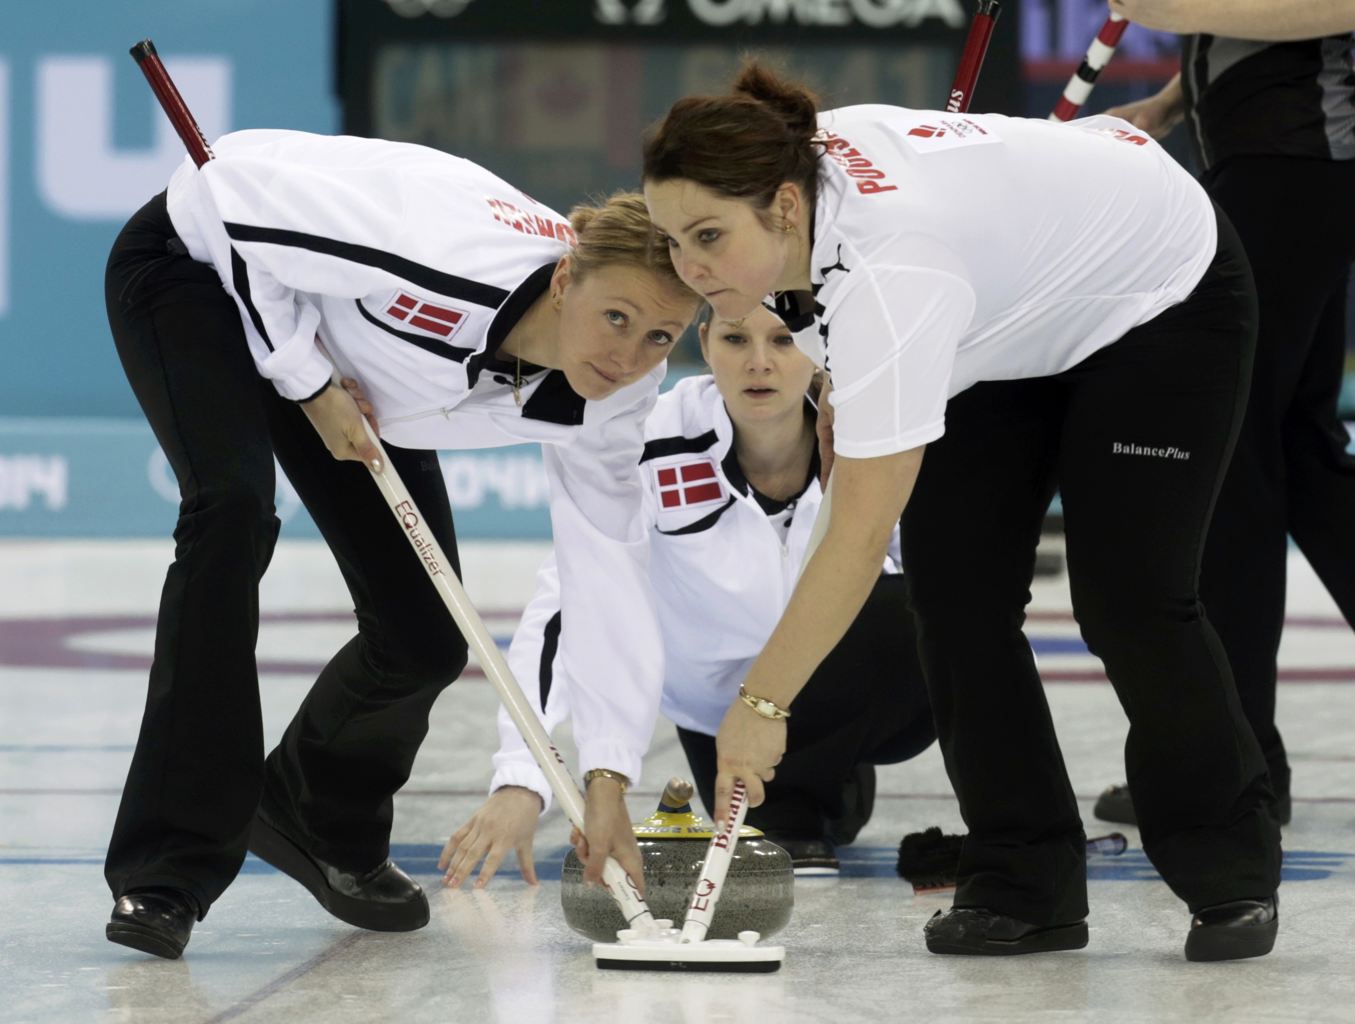 Canadian women curling team At The Sochi 2014 Winter Olympic Games on